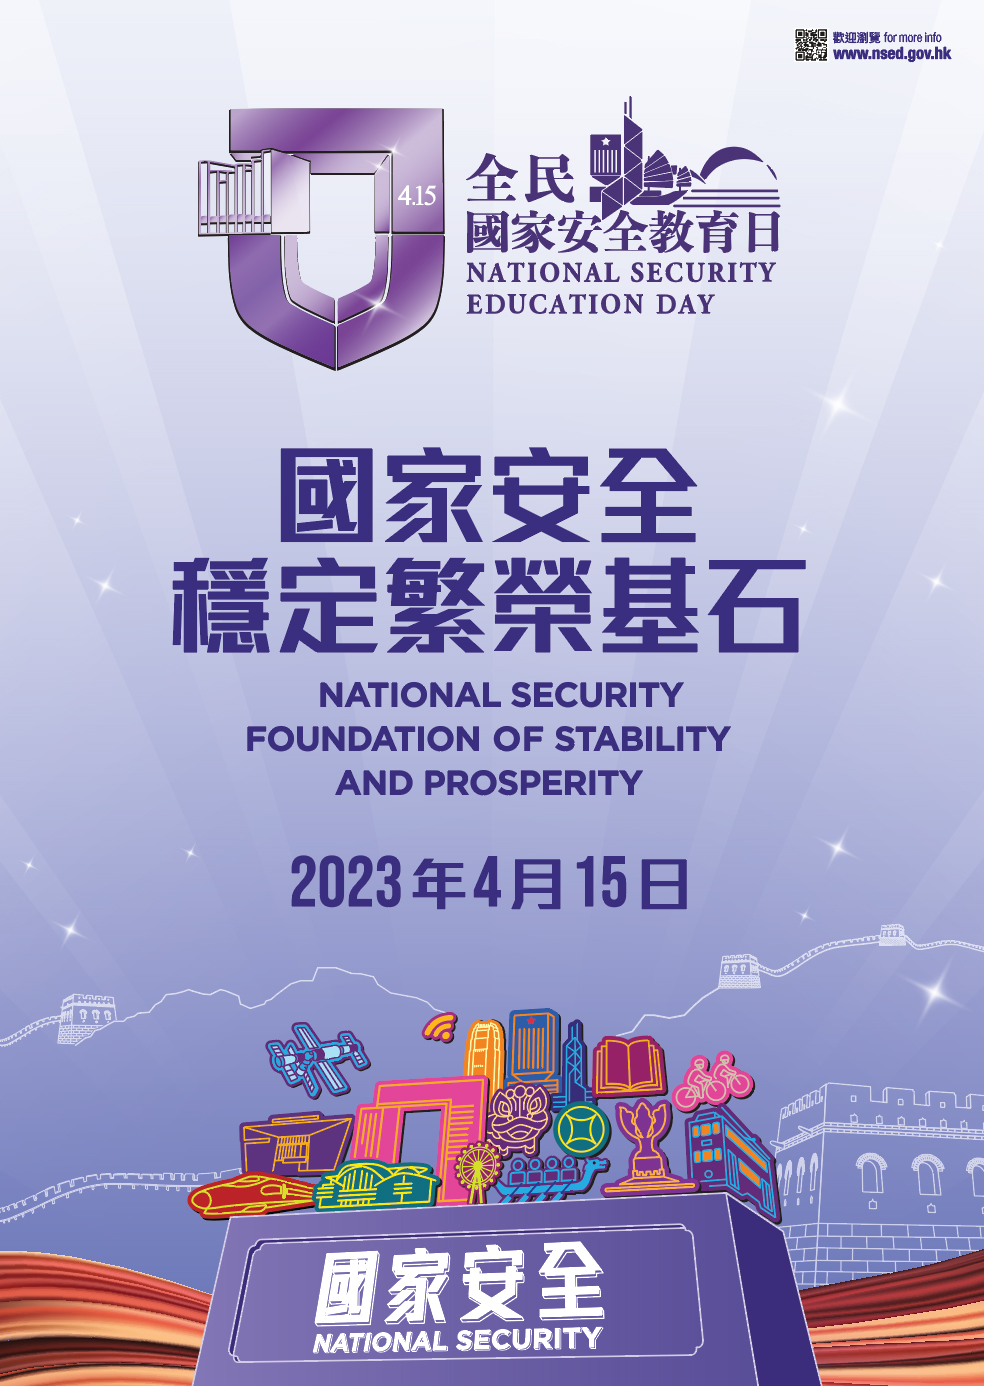 2023 National Security Education Day Poster